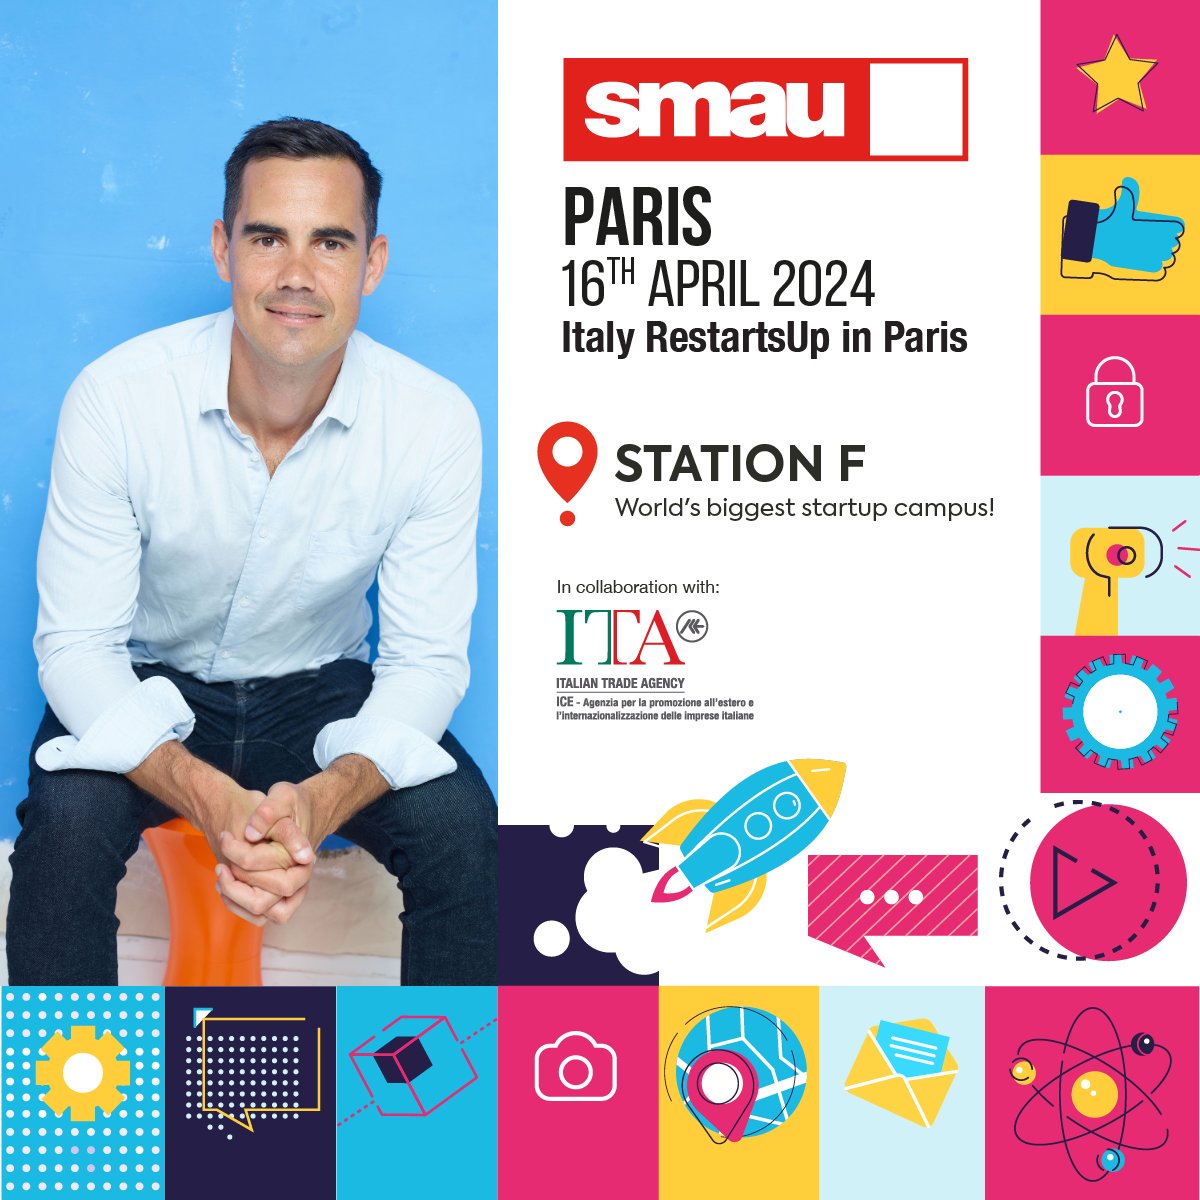 🚀🇮🇹 Excited to join @smaunotes event in Paris next Tuesday! I'll be discussing the transition to a sustainable and smarter business model for the future. #sustainability #Innovation -- Entusiasta di partecipare all’evento @smaunotes a Parigi martedì prossimo! Parlerò della…